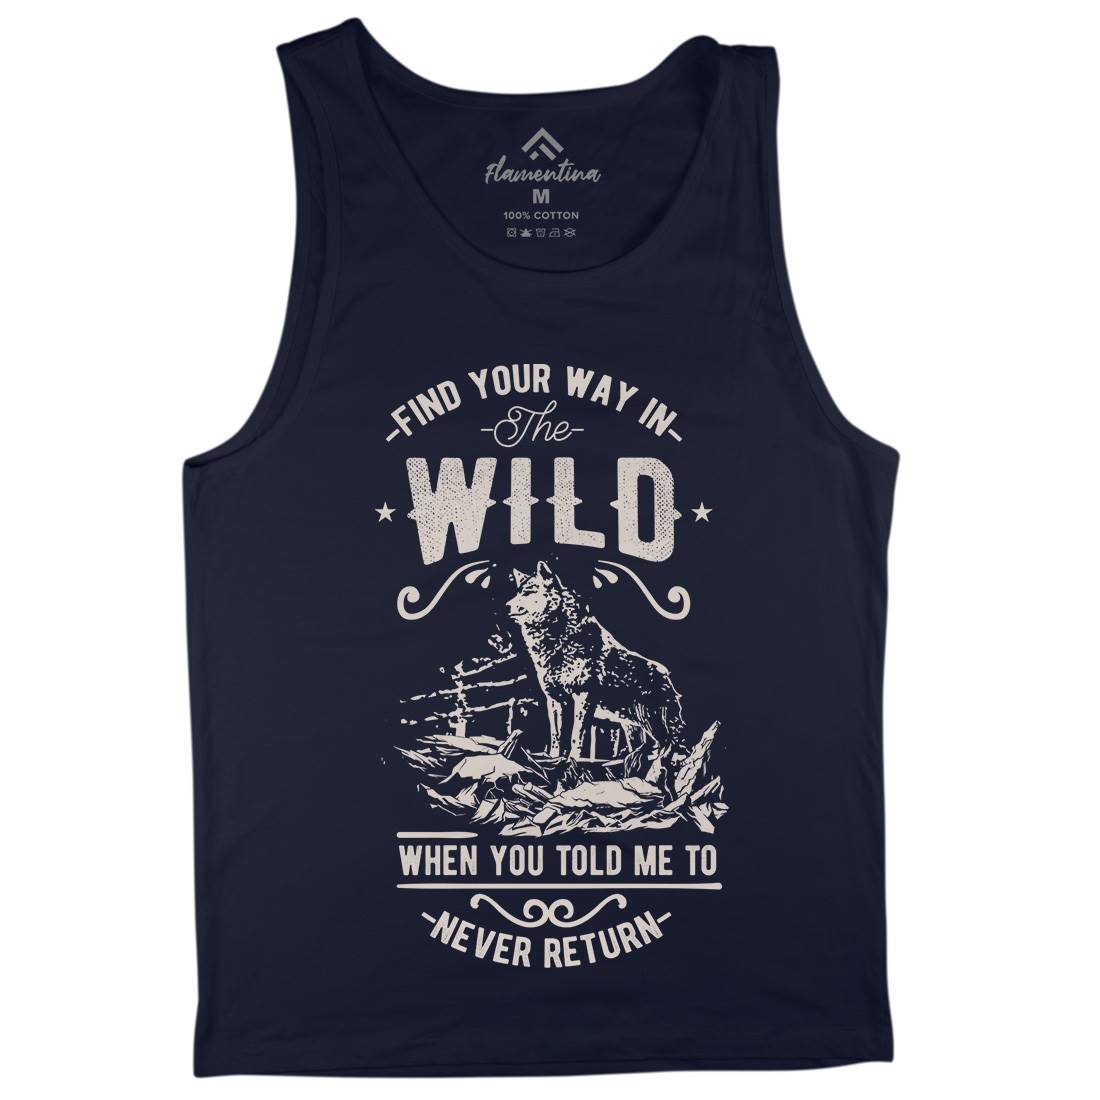 Find Your Way In The Wild Mens Tank Top Vest Nature C932